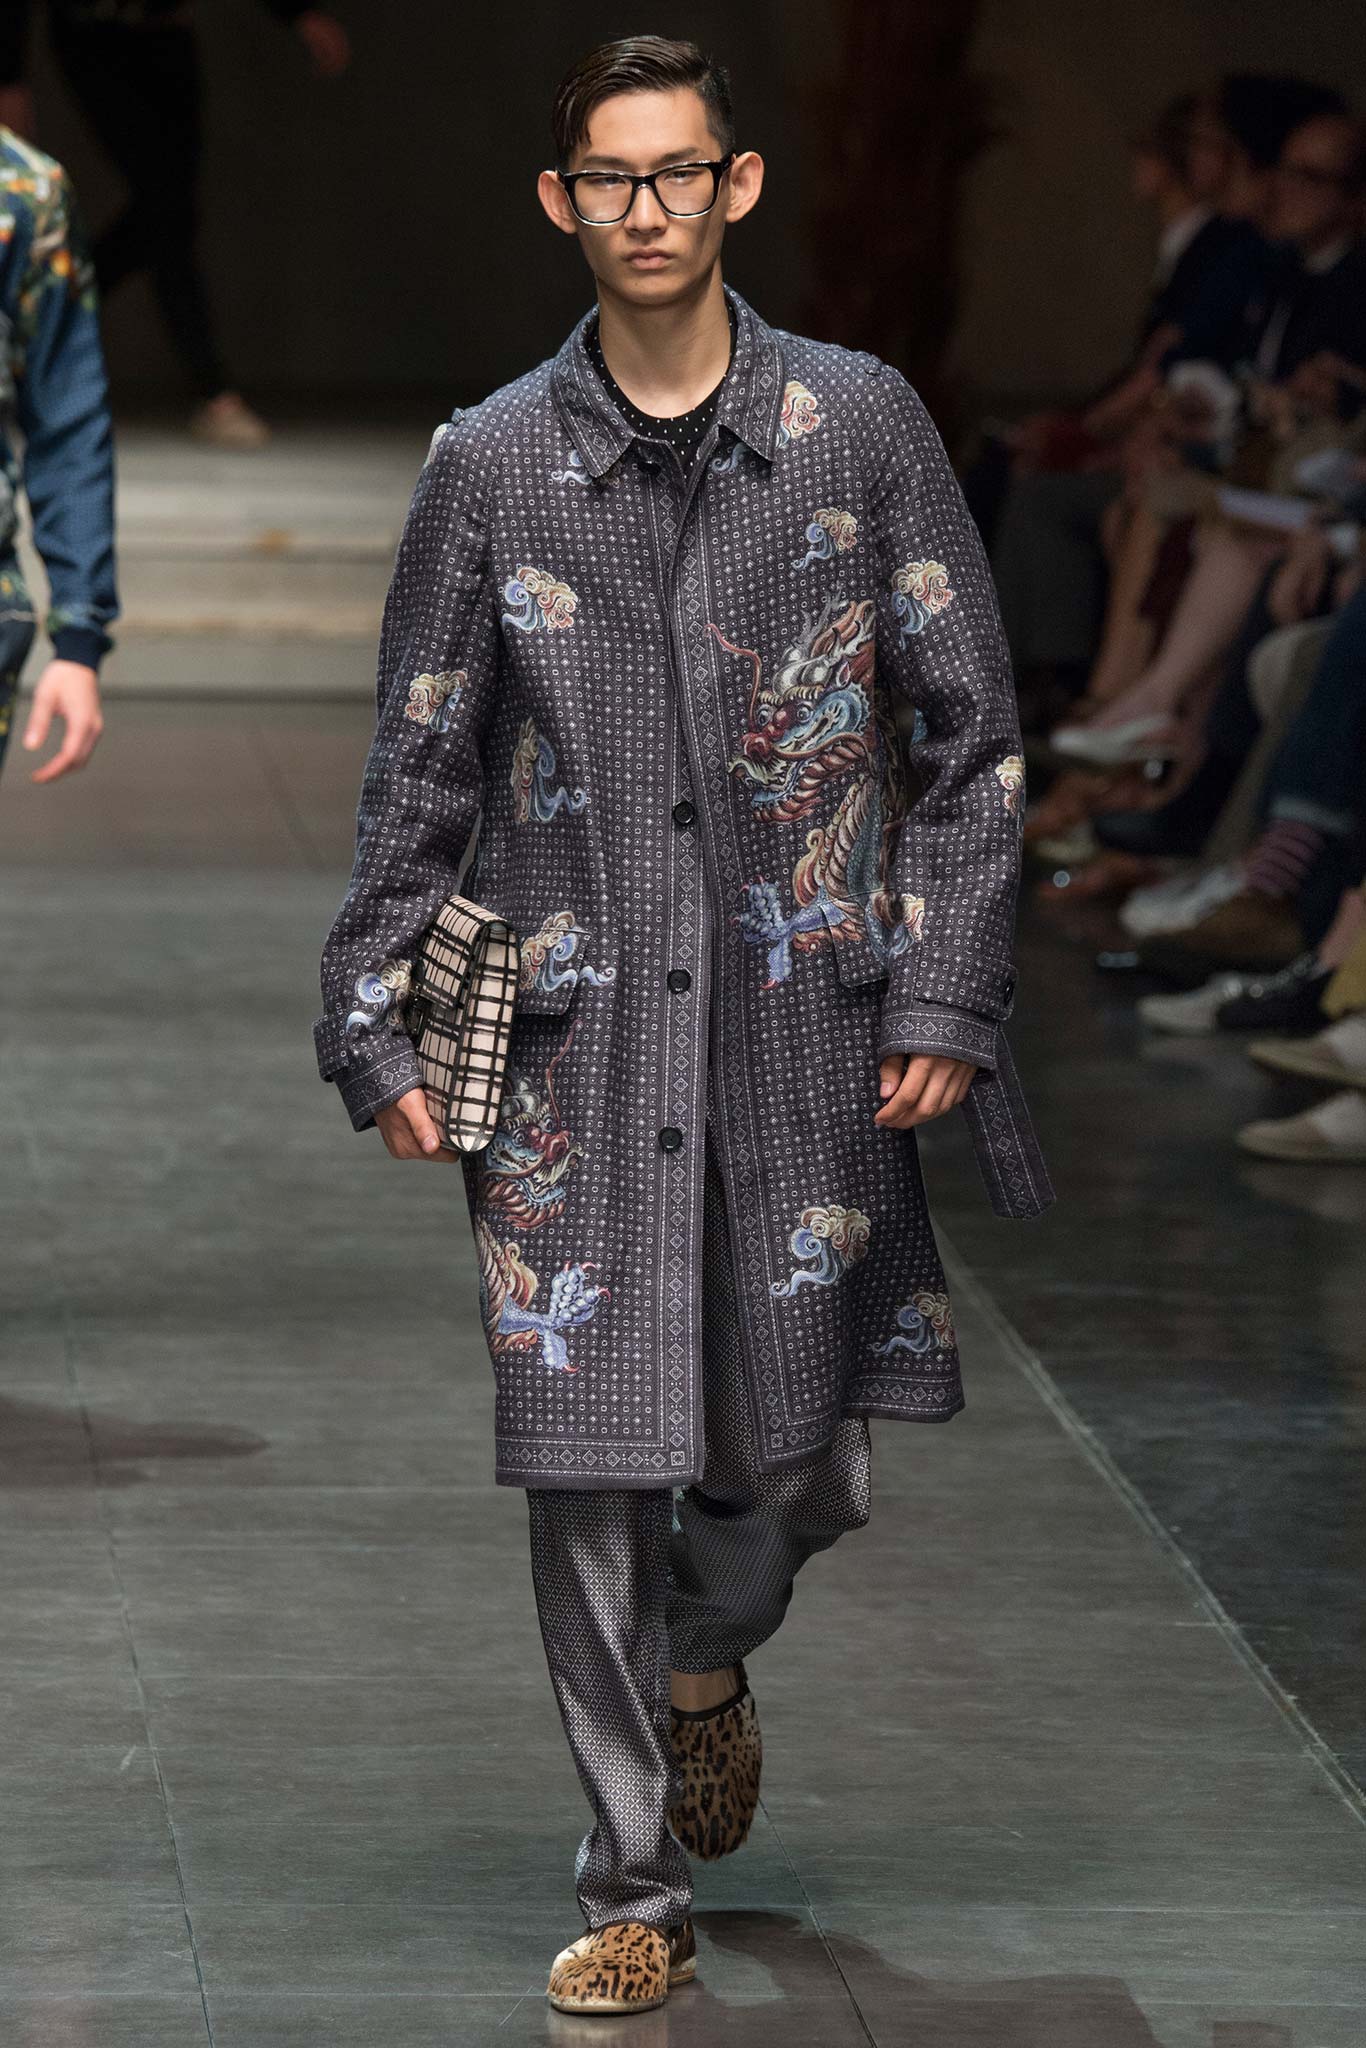 spring-2016-menswear-trends-07-chinoiserie-03